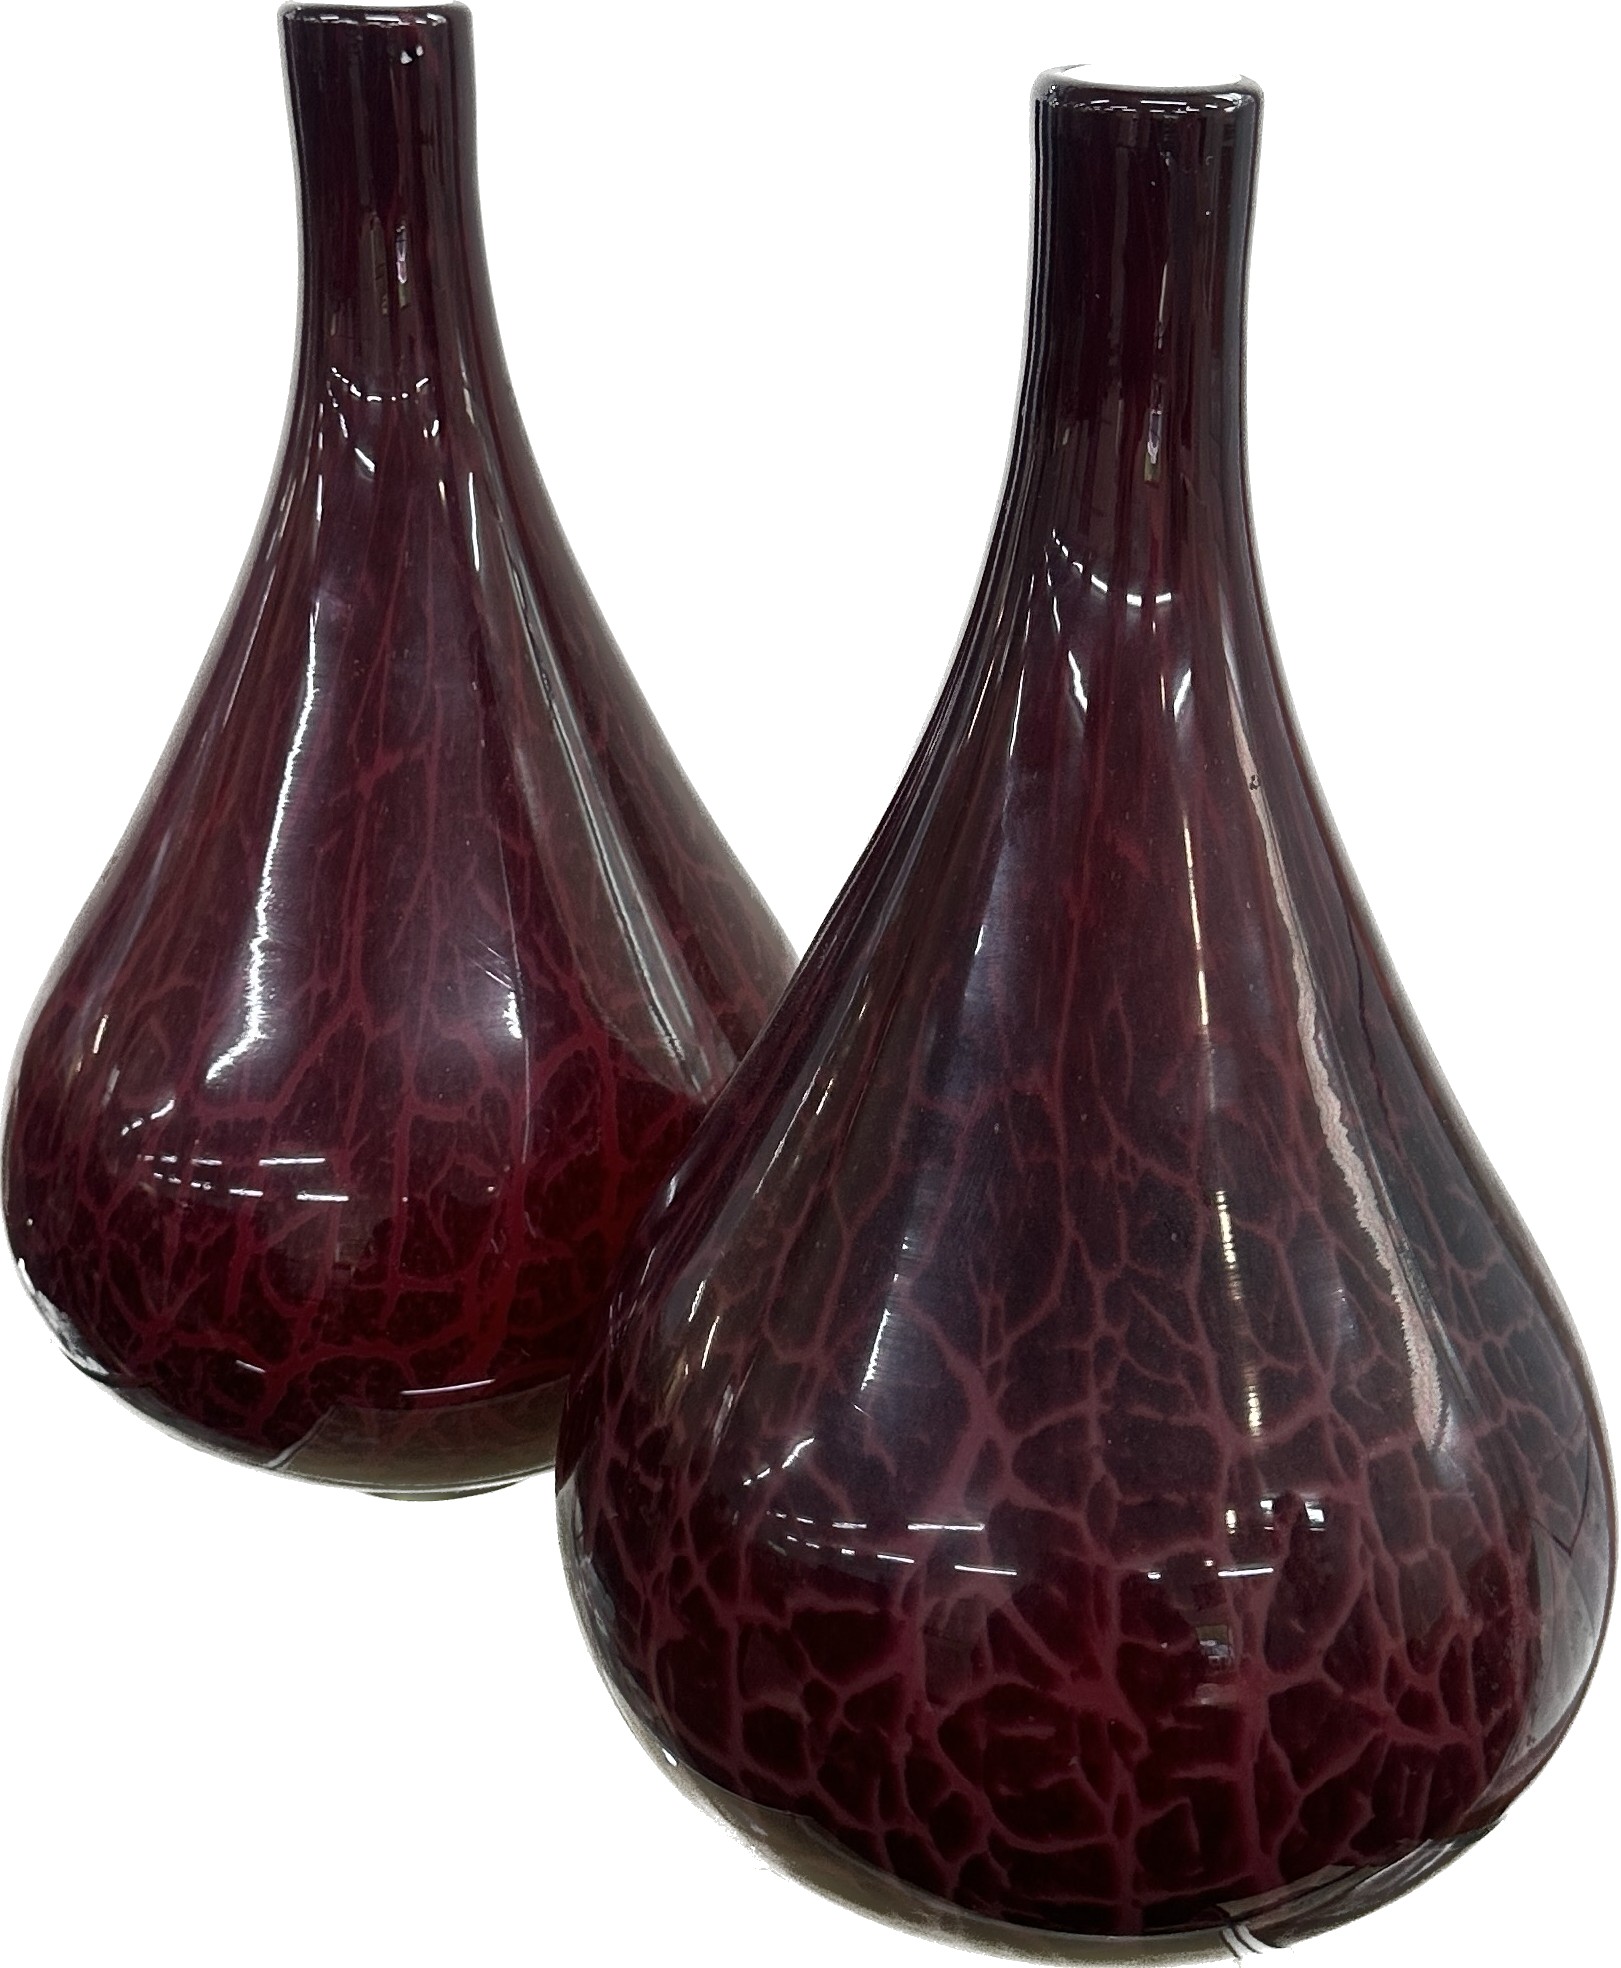 Pair decorative Burgundy glass tear drop vases, both in overall good condition, approximate height